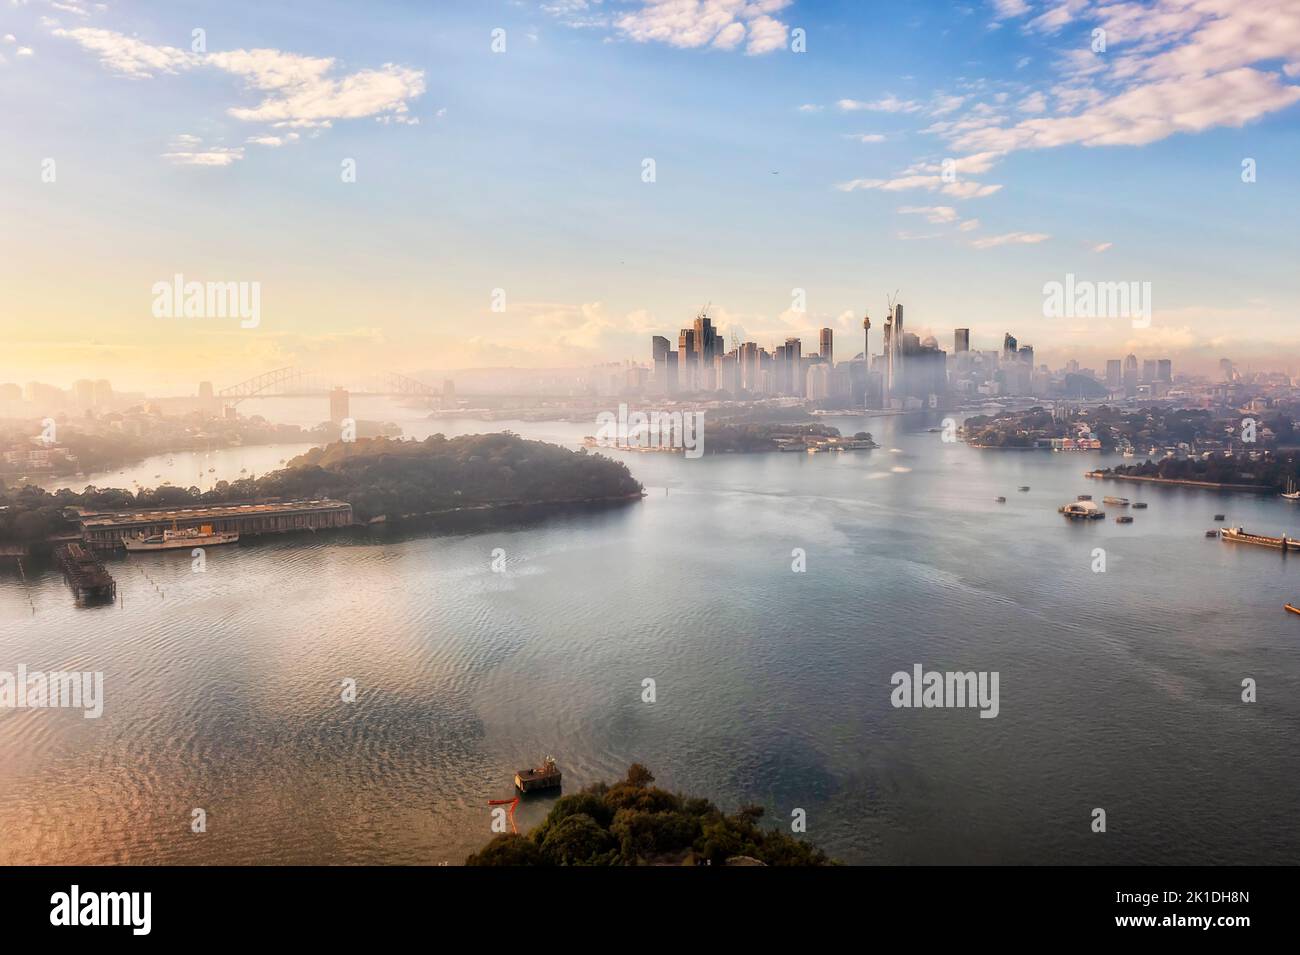 Parramatta river to Sydney Harbour around city CBD Waterfront - aerial cityscape and skyline at sunrise. Stock Photo